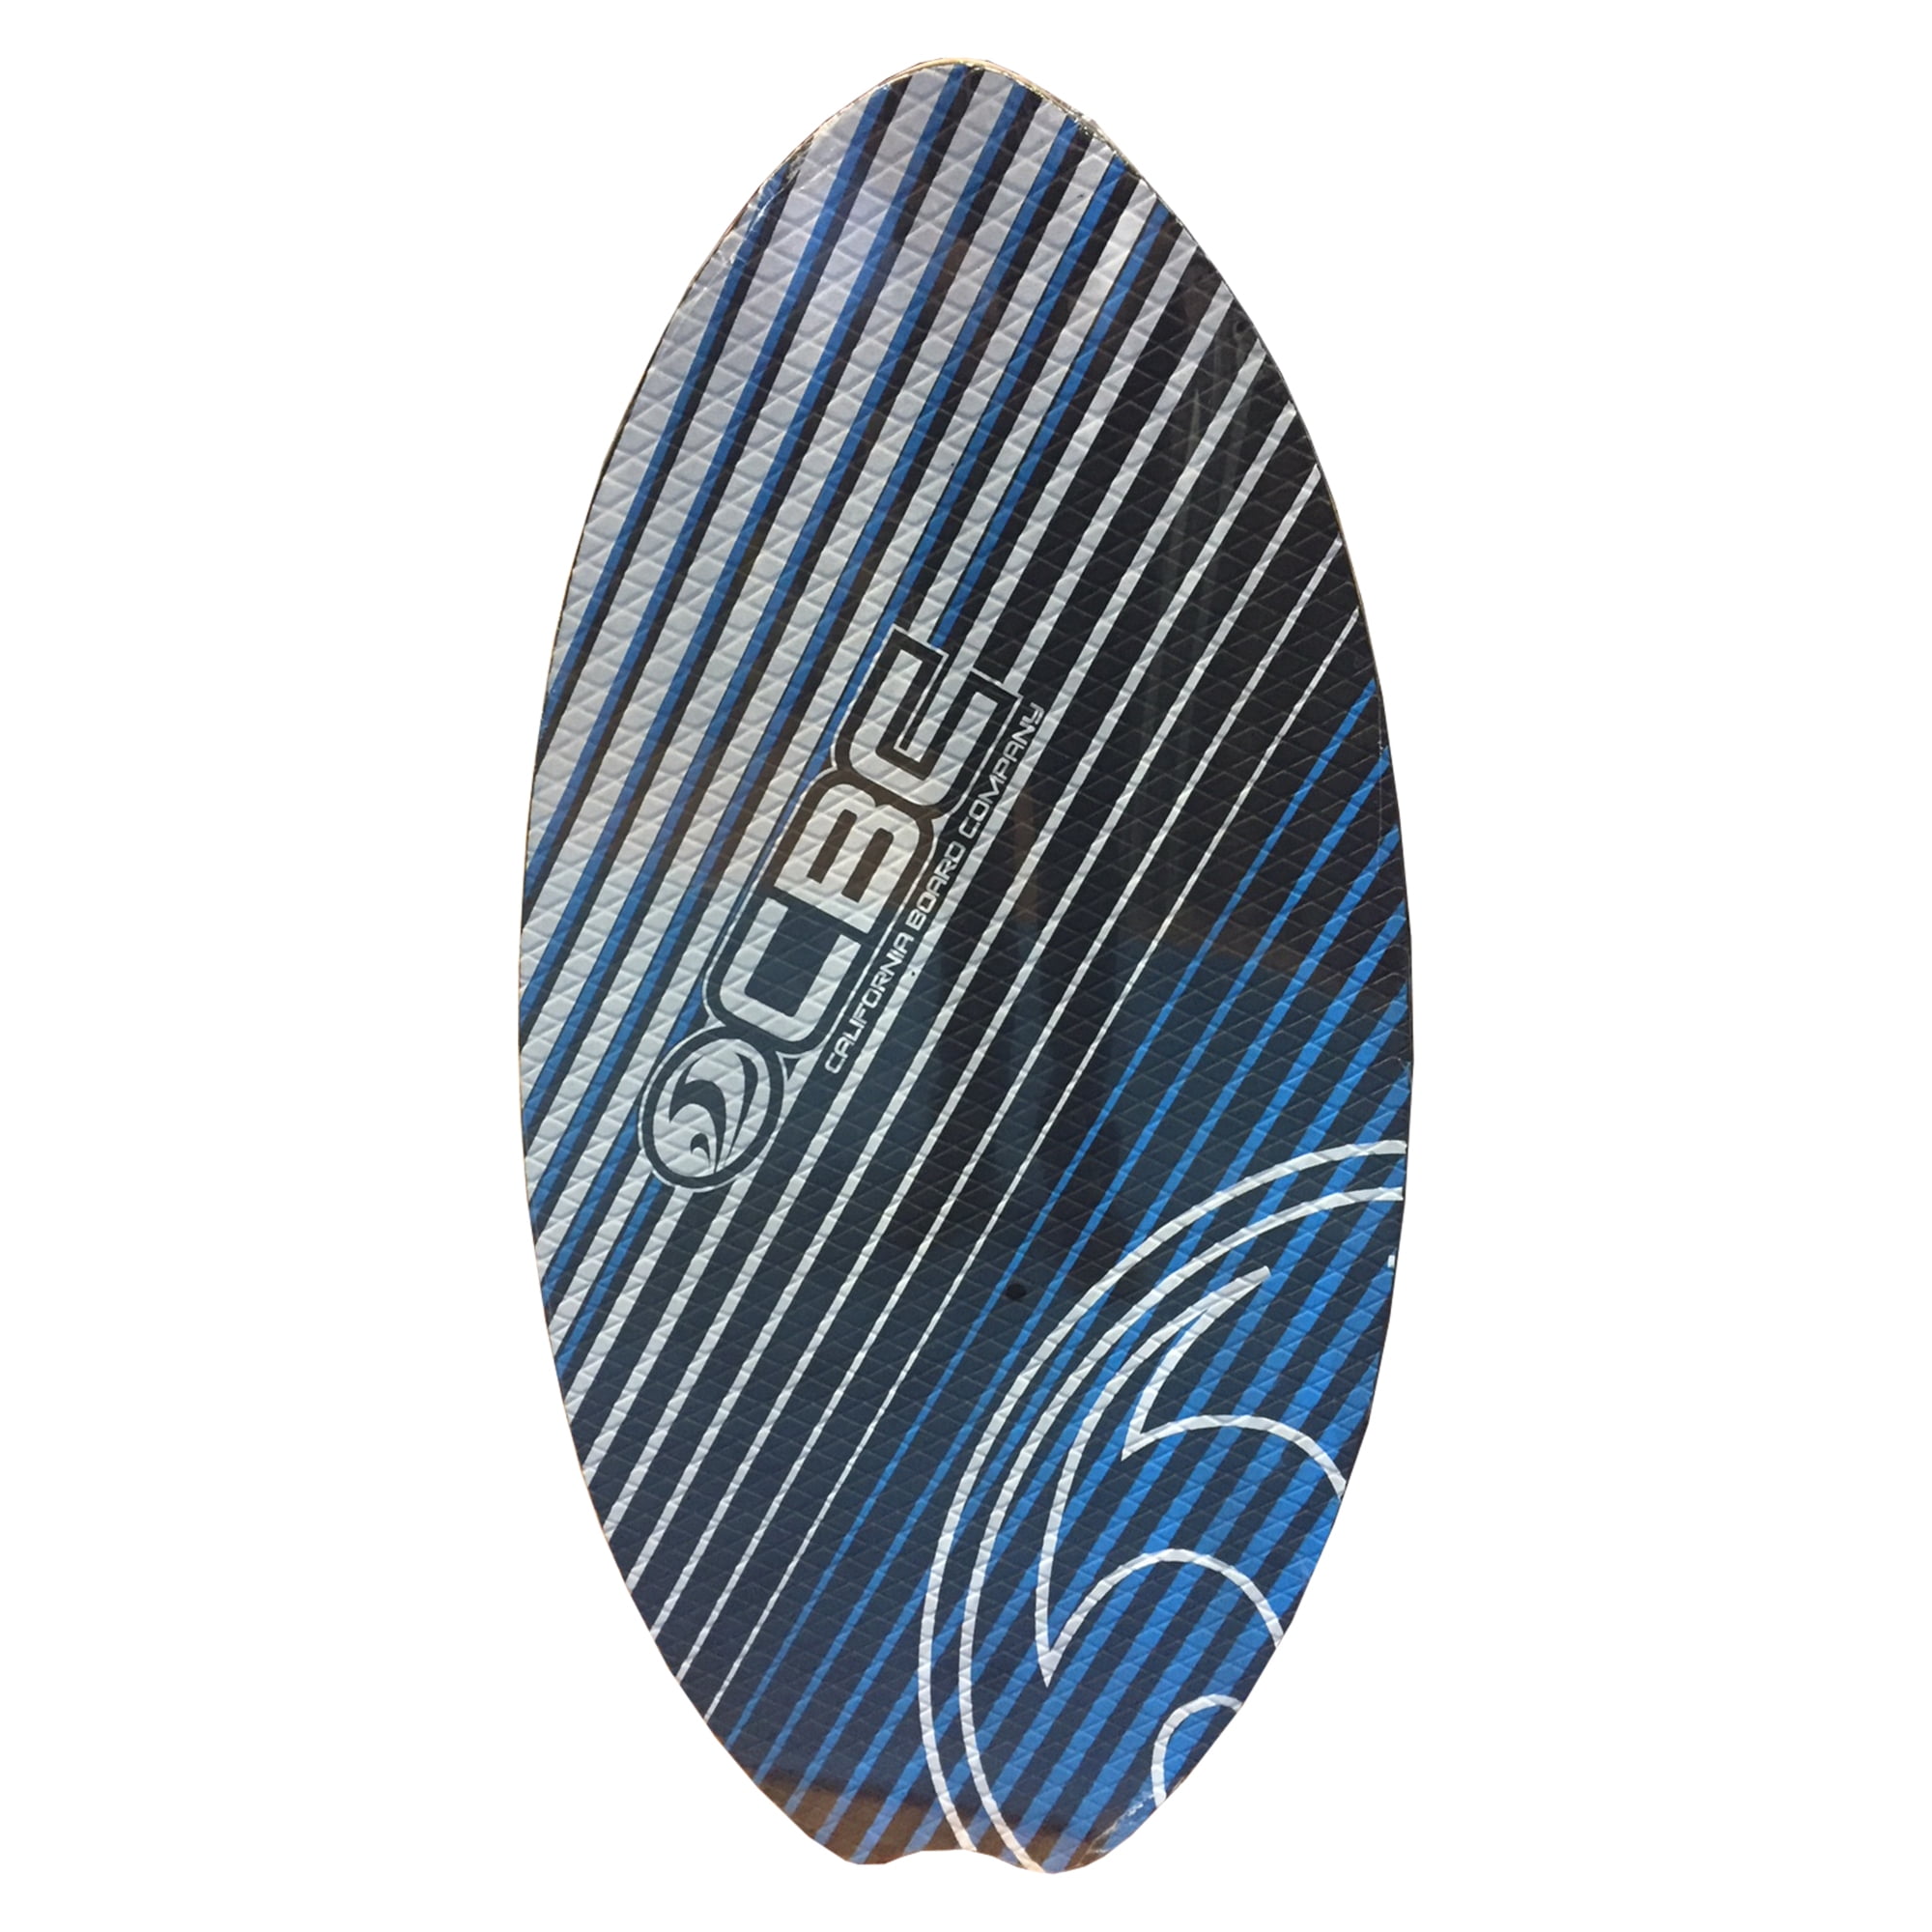 Surf Quest Oldschool Skimboard 108cm with kicktail Raw Wood